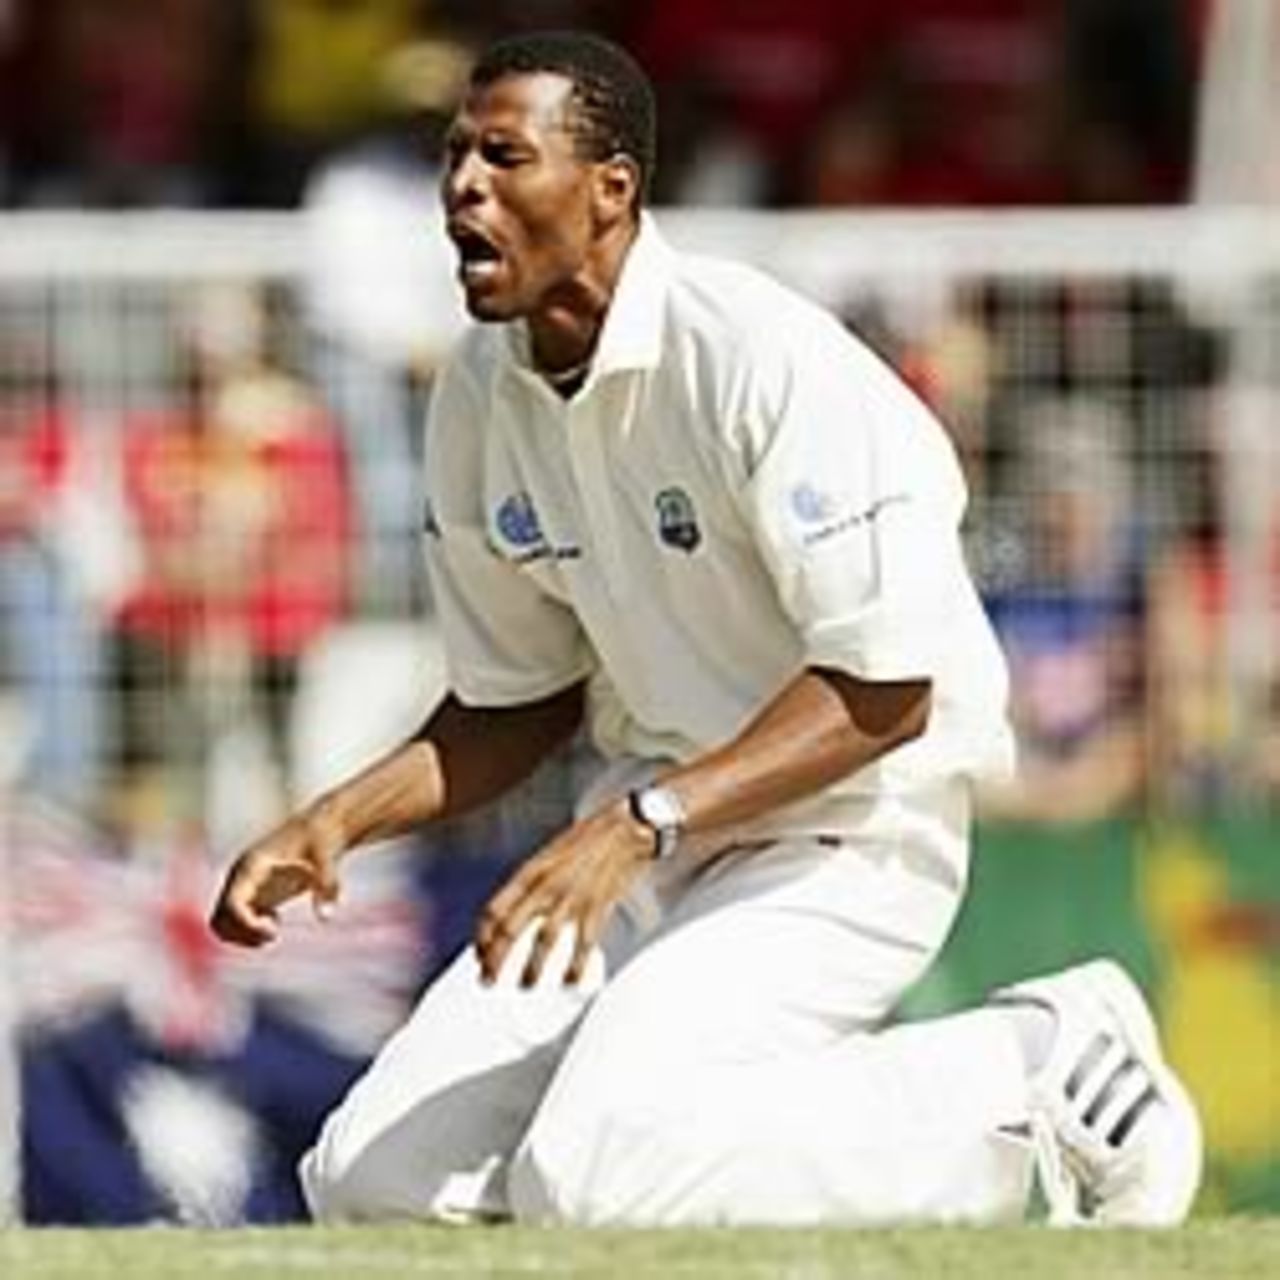 Mervyn Dillon of the West Indies shows his frustration at having an appeal turned down during day three of the Fourth Test between the West Indies and Australia on May 11, 2003 at the Recreation Oval in St John's, Antigua.